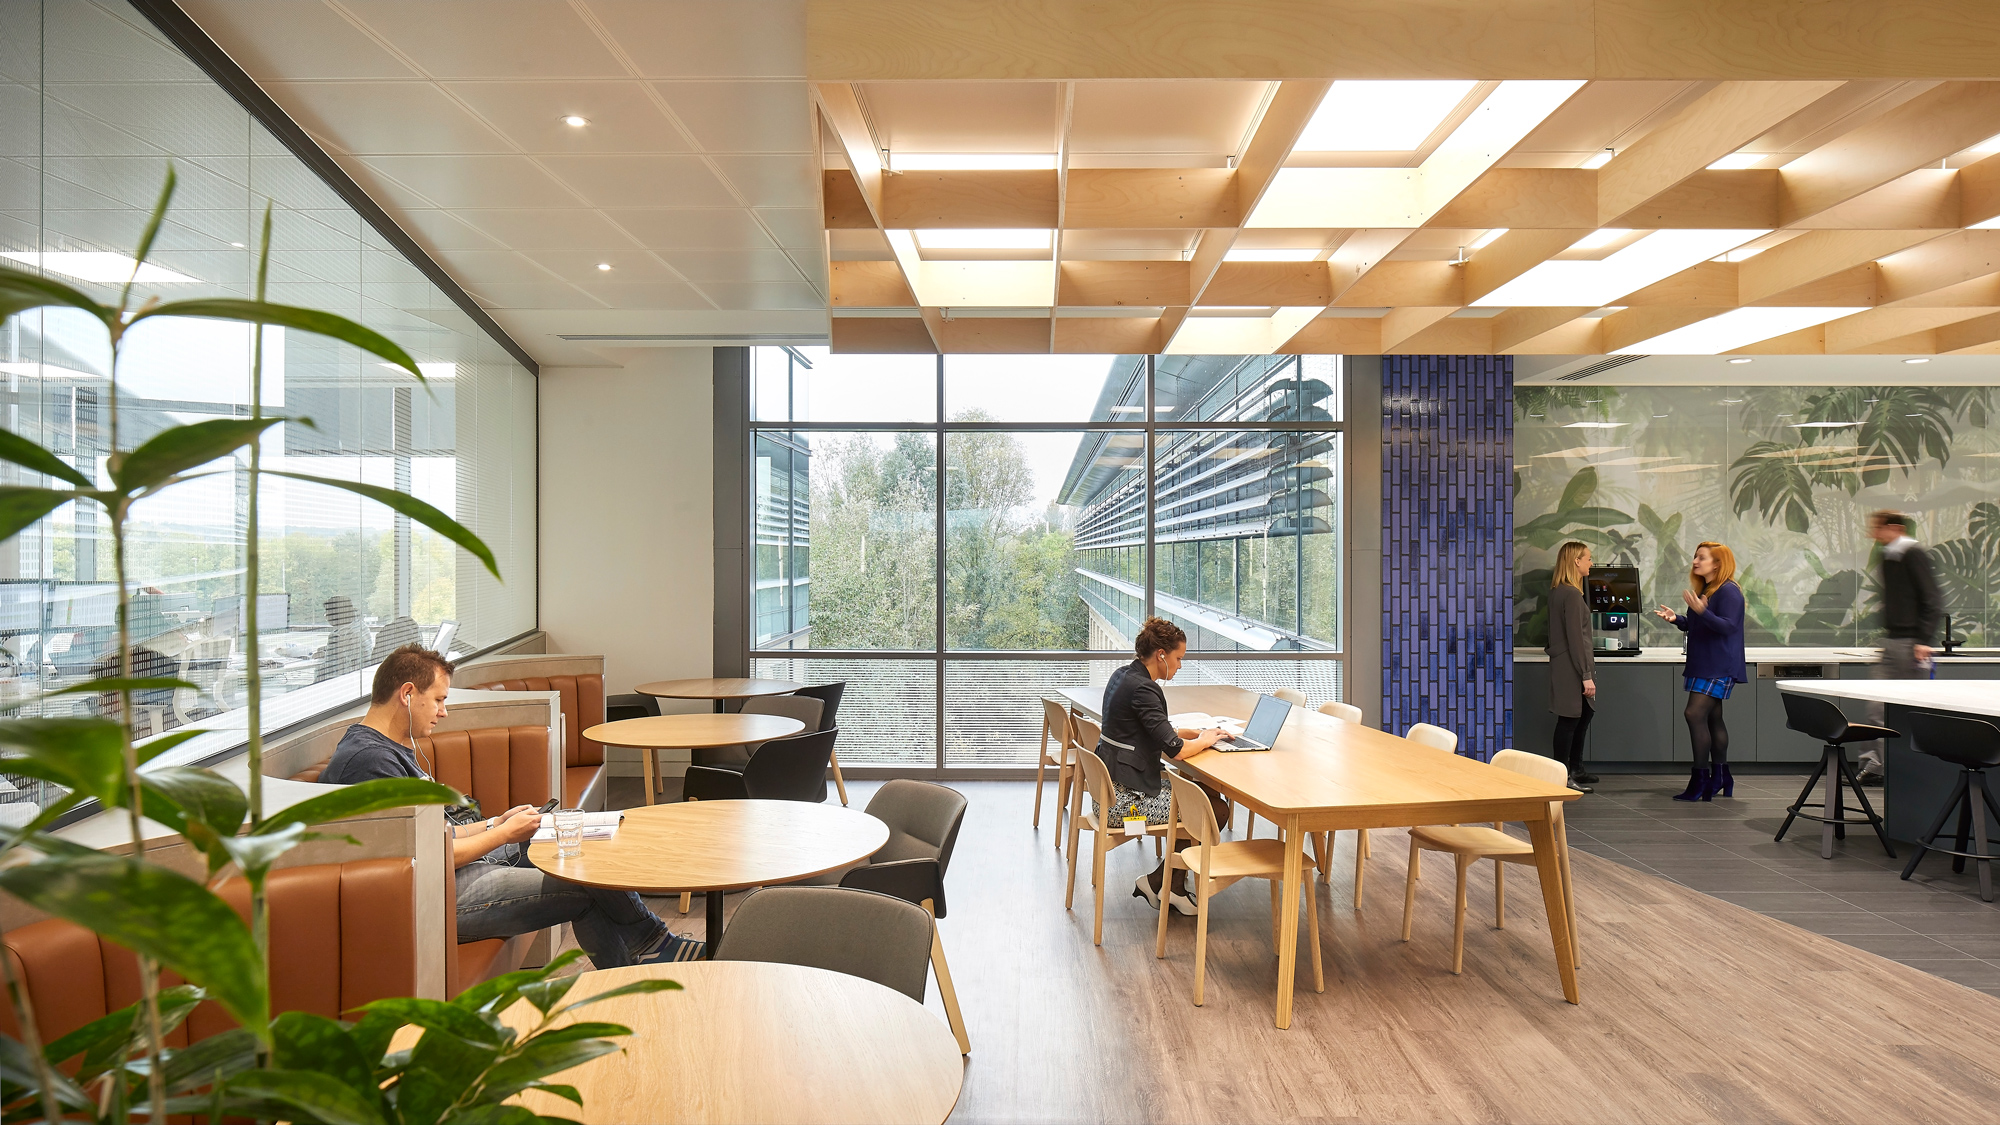 An airy office break room featuring natural wood tables, floor-to-ceiling windows with a view of greenery, and people working and conversing, accented with modern lighting and decor elements.